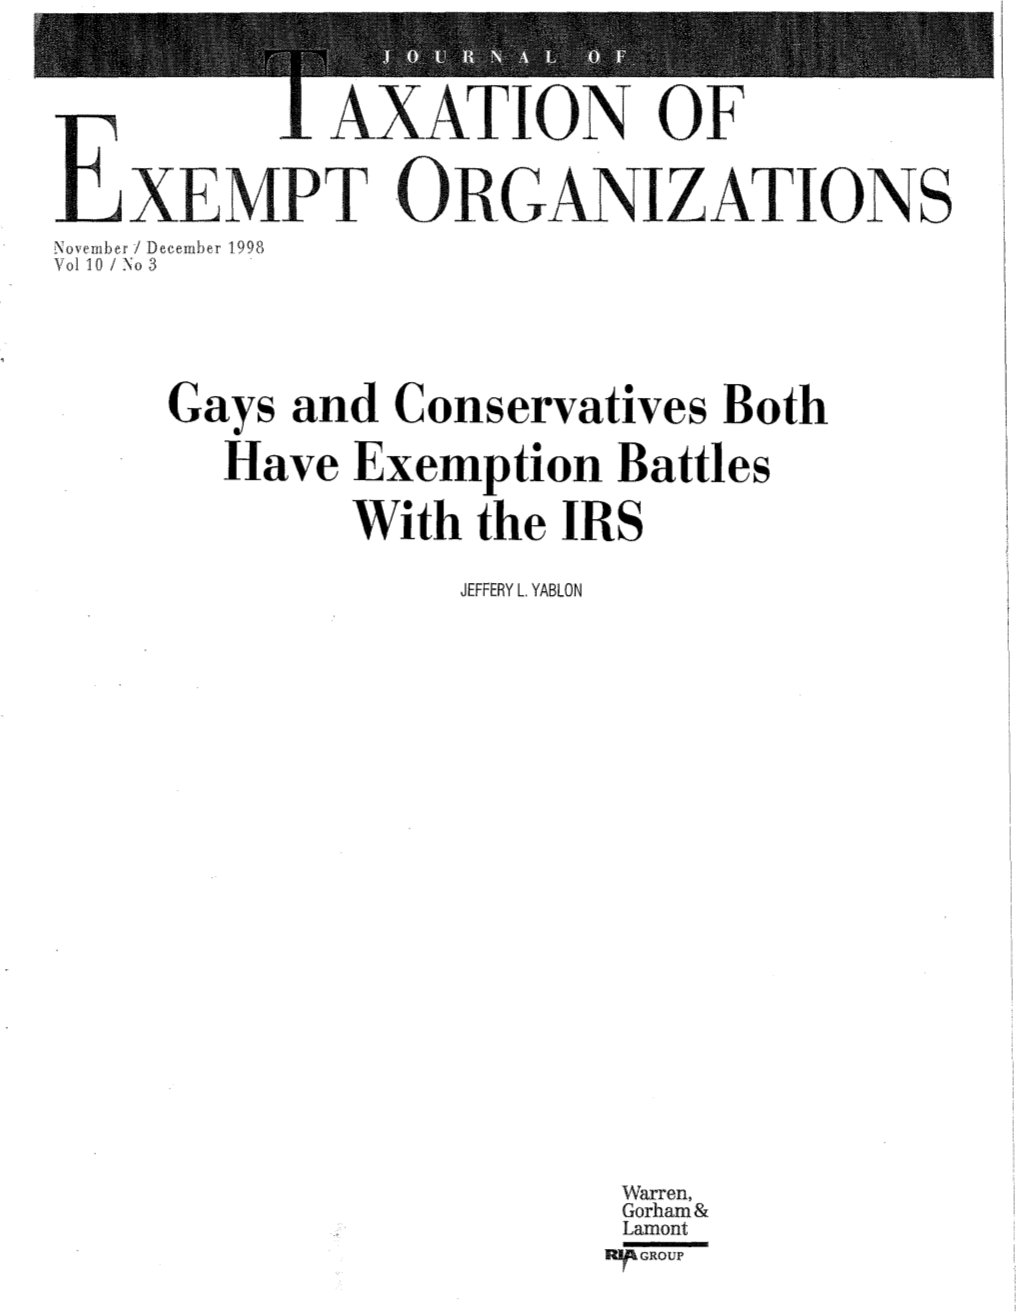 Gays and Conservatives Both Have Exemption Battles with the IRS